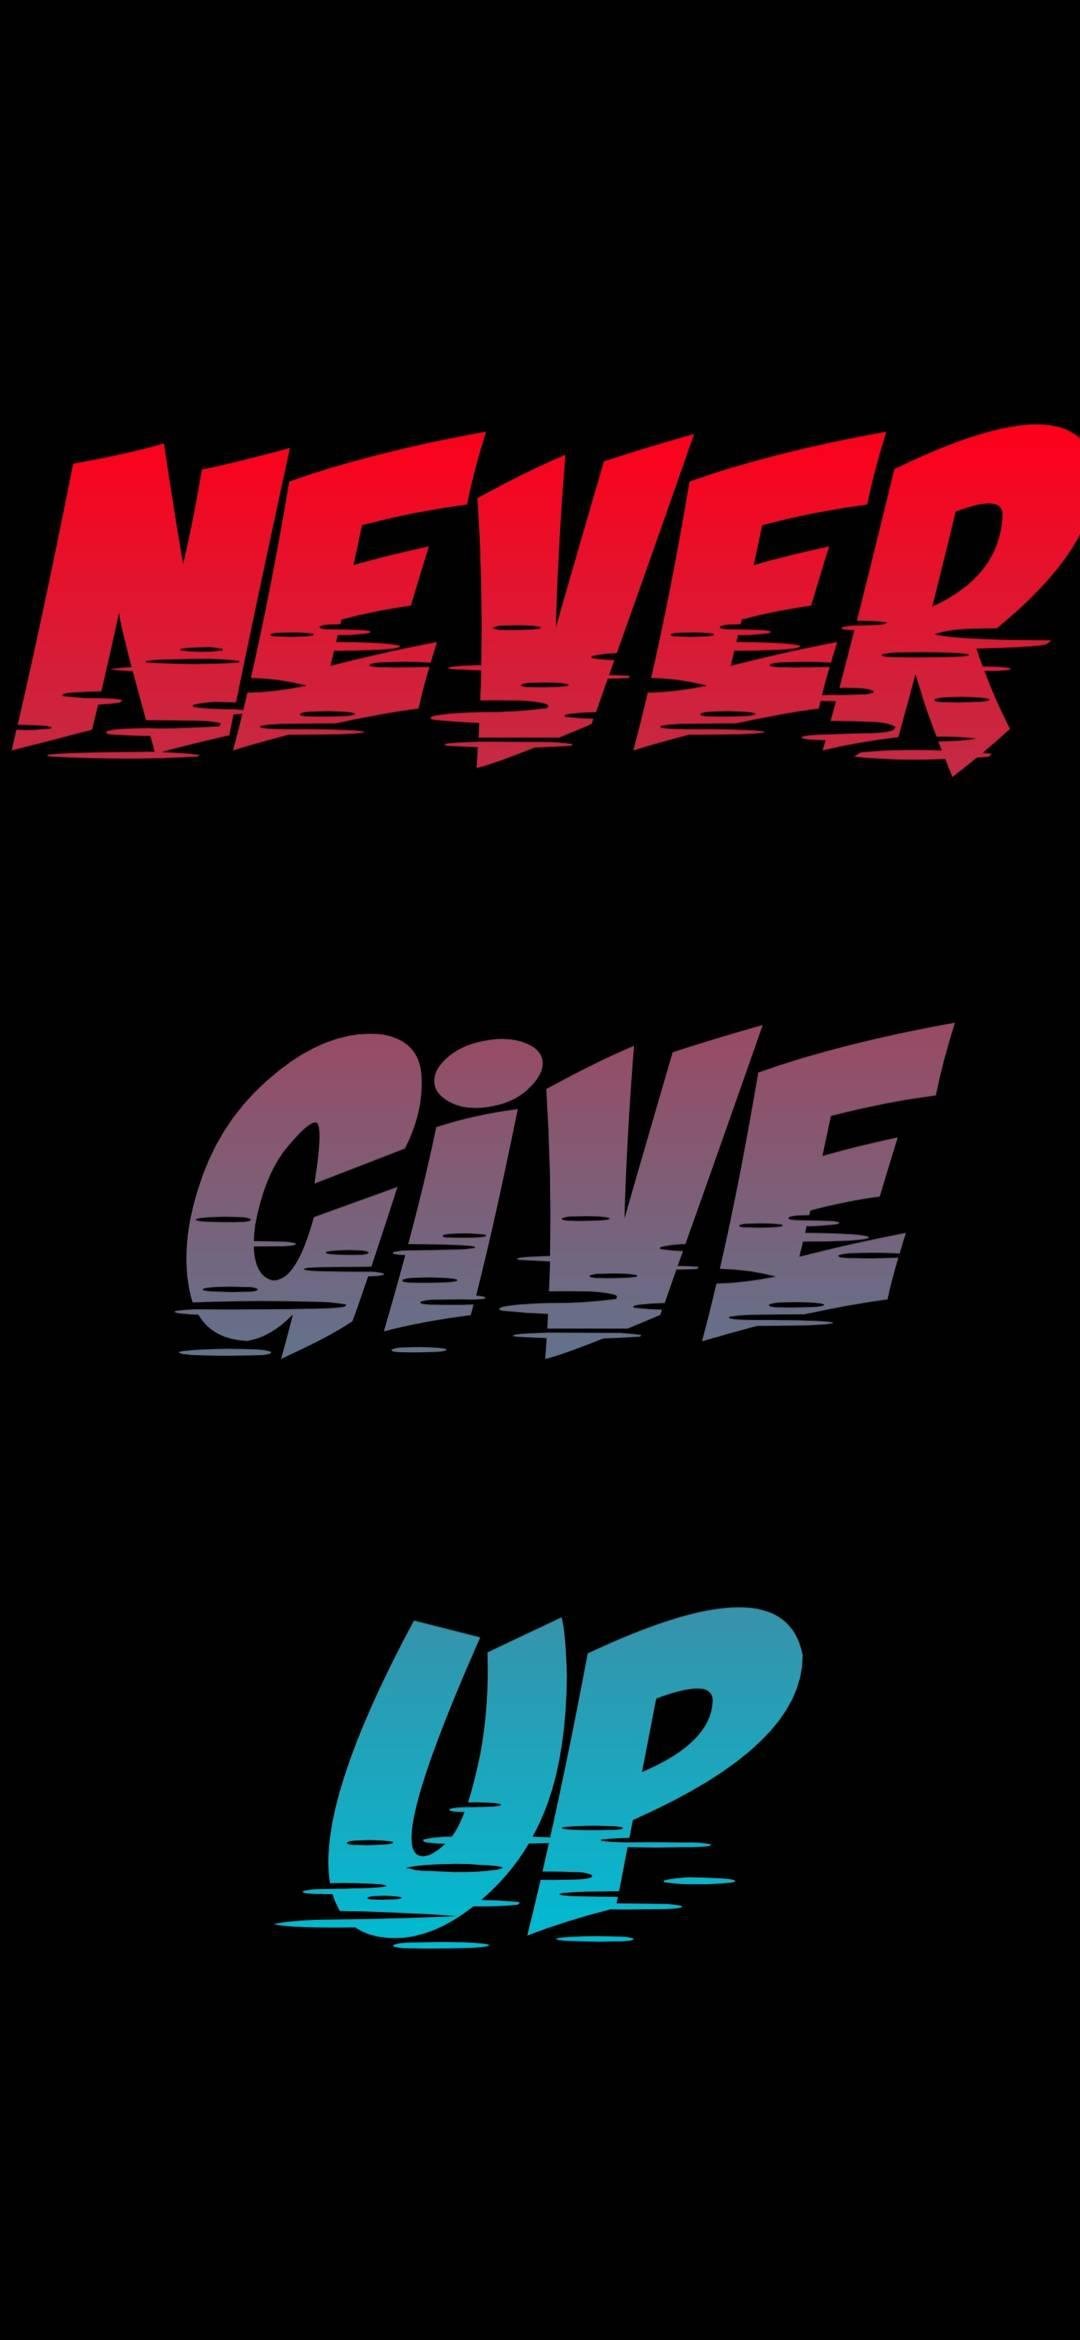 Dont Give Up Wallpapers